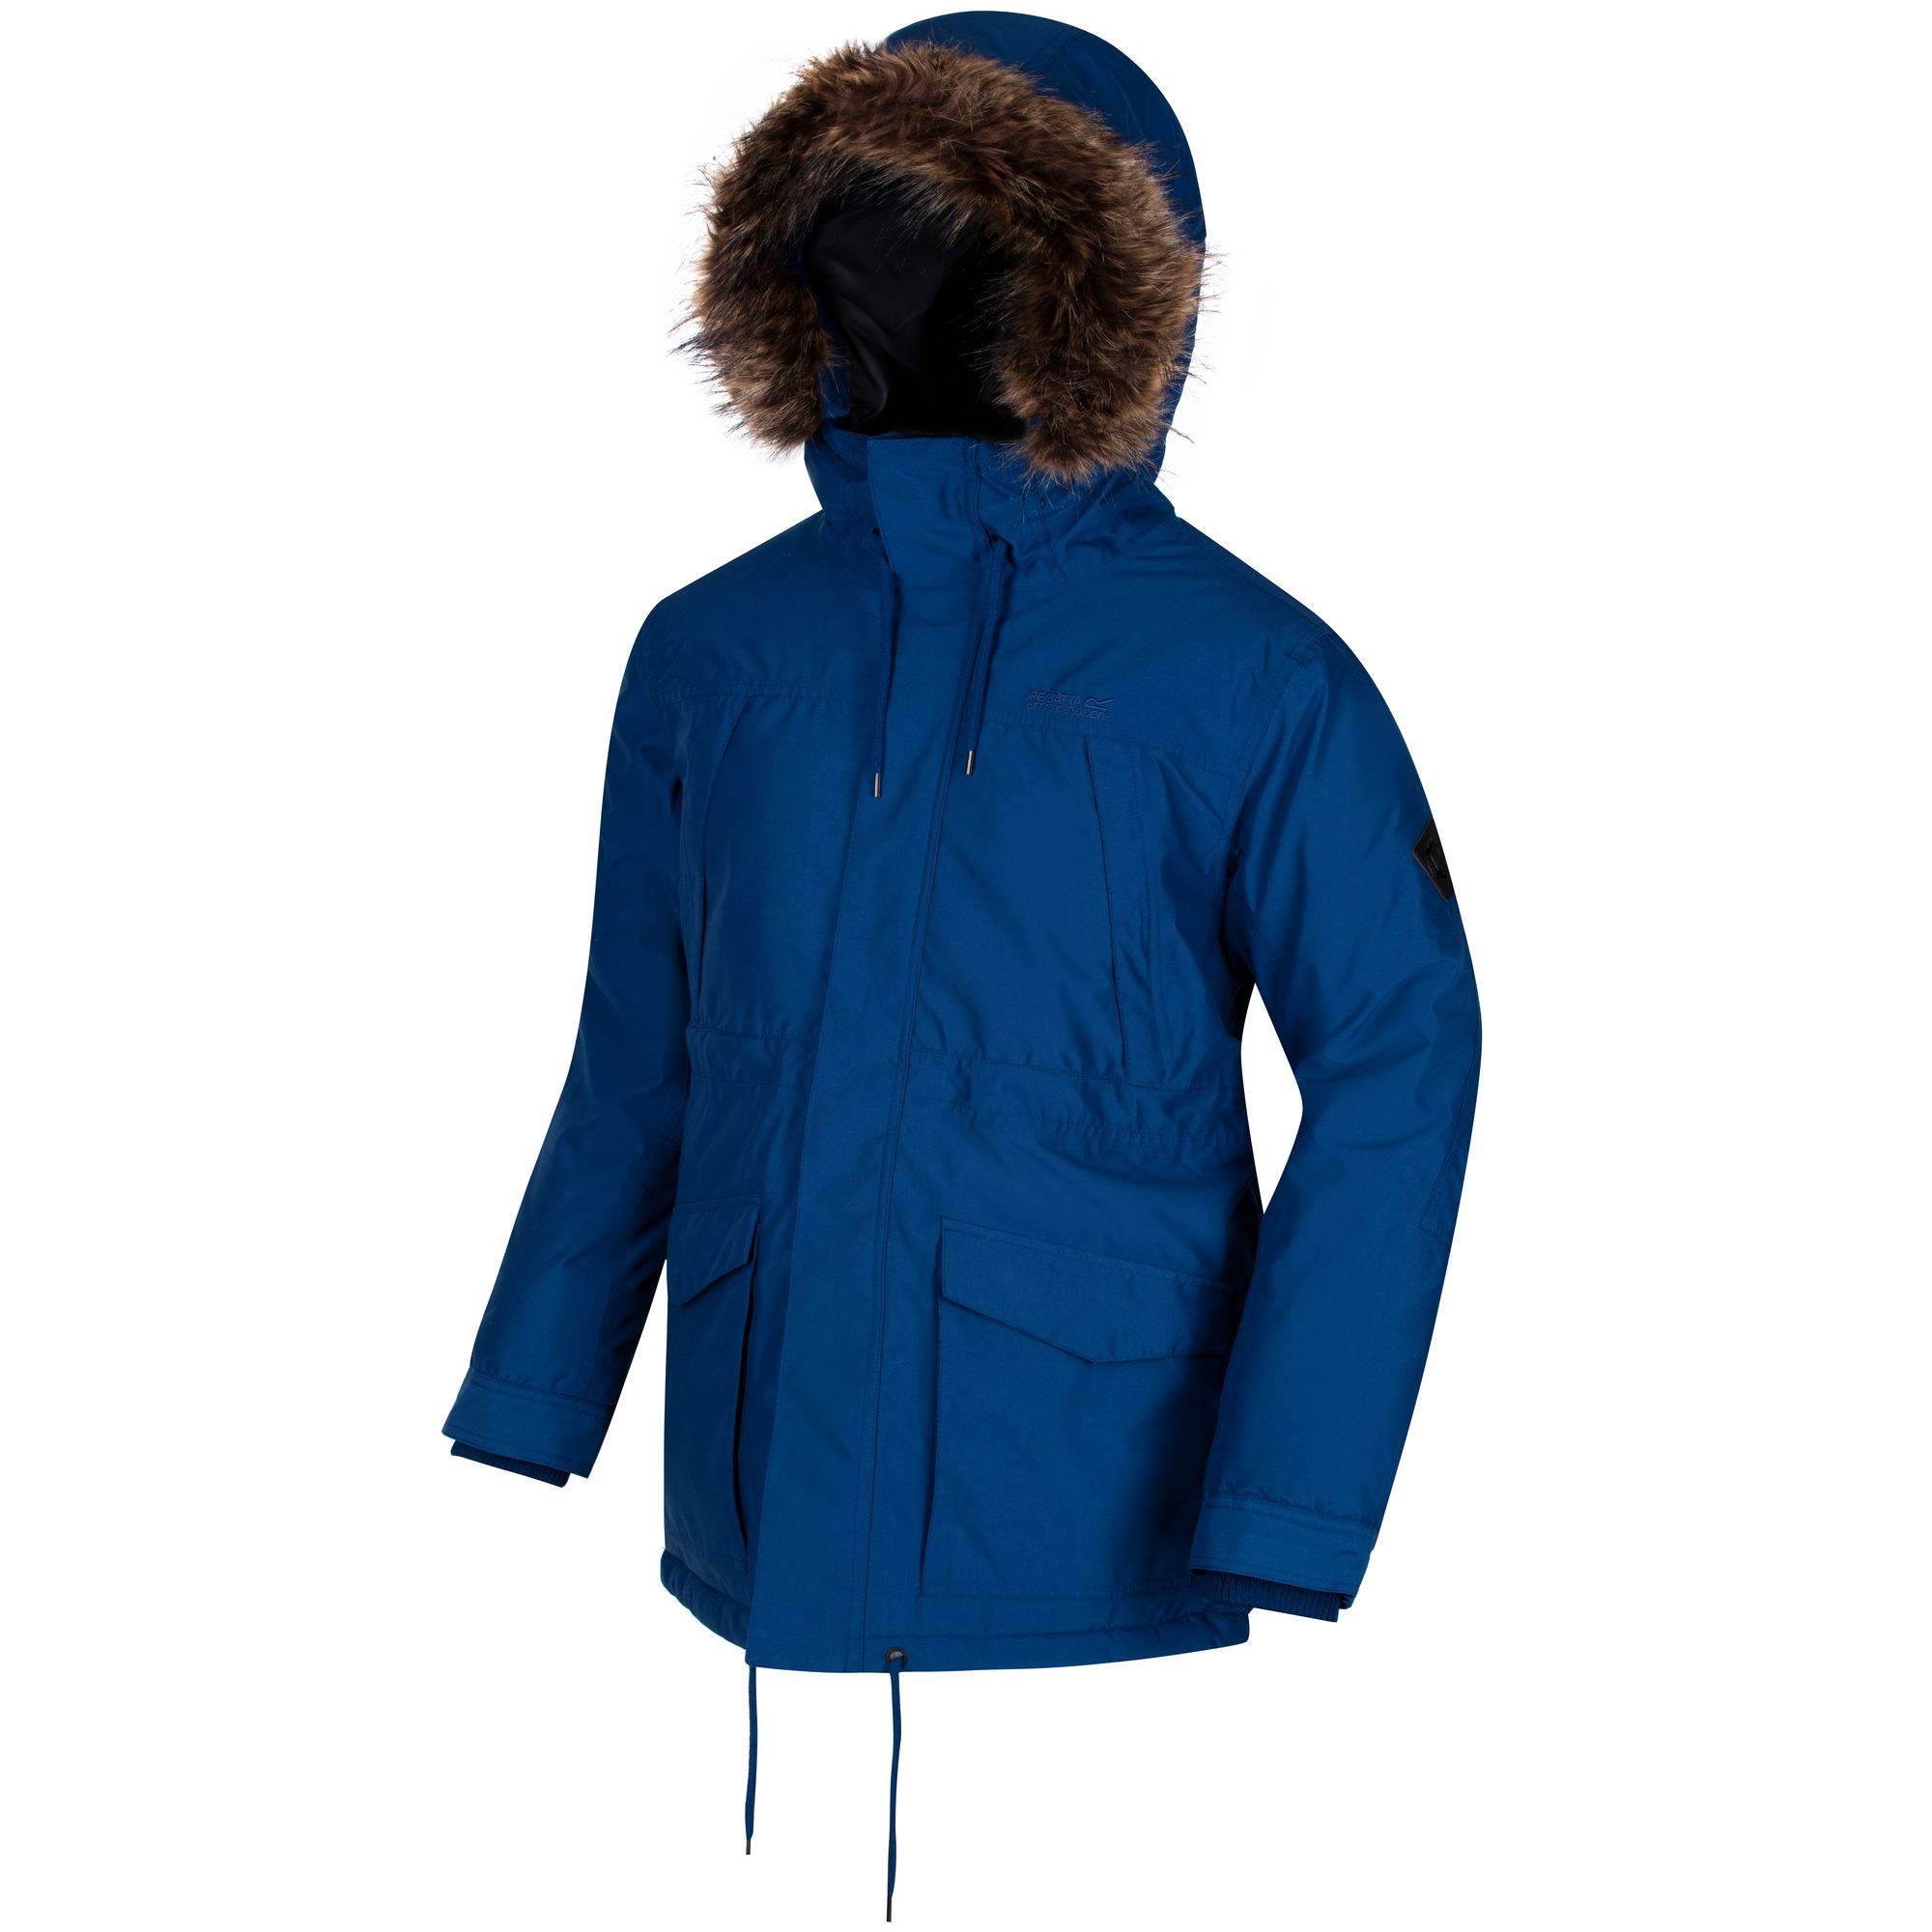 Warm, waterproof and breathable parka with utility-inspired details. Outer uses supple ISOTEX 5,000 twill fabric with additional Durable Water Repellent and sealed seams to protect from wet or snowy conditions. Cut thigh length with a fishtail back, drawcord waist and fine quality faux-fur trim hood (removable). Front secures with a chunky two-way venting zip and a poppered stormflap. Inside is lined with quick-drying, down-touch Warmloft insulation. Design details include the contour map print lining and a 1981 heritage badge on the left sleeve. Regatta Mens sizing (chest approx): XS (35-36in/89-91.5cm), S (37-38in/94-96.5cm), M (39-40in/99-101.5cm), L (41-42in/104-106.5cm), XL (43-44in/109-112cm), XXL (46-48in/117-122cm), XXXL (49-51in/124.5-129.5cm), XXXXL (52-54in/132-137cm), XXXXXL (55-57in/140-145cm). 100% polyester.